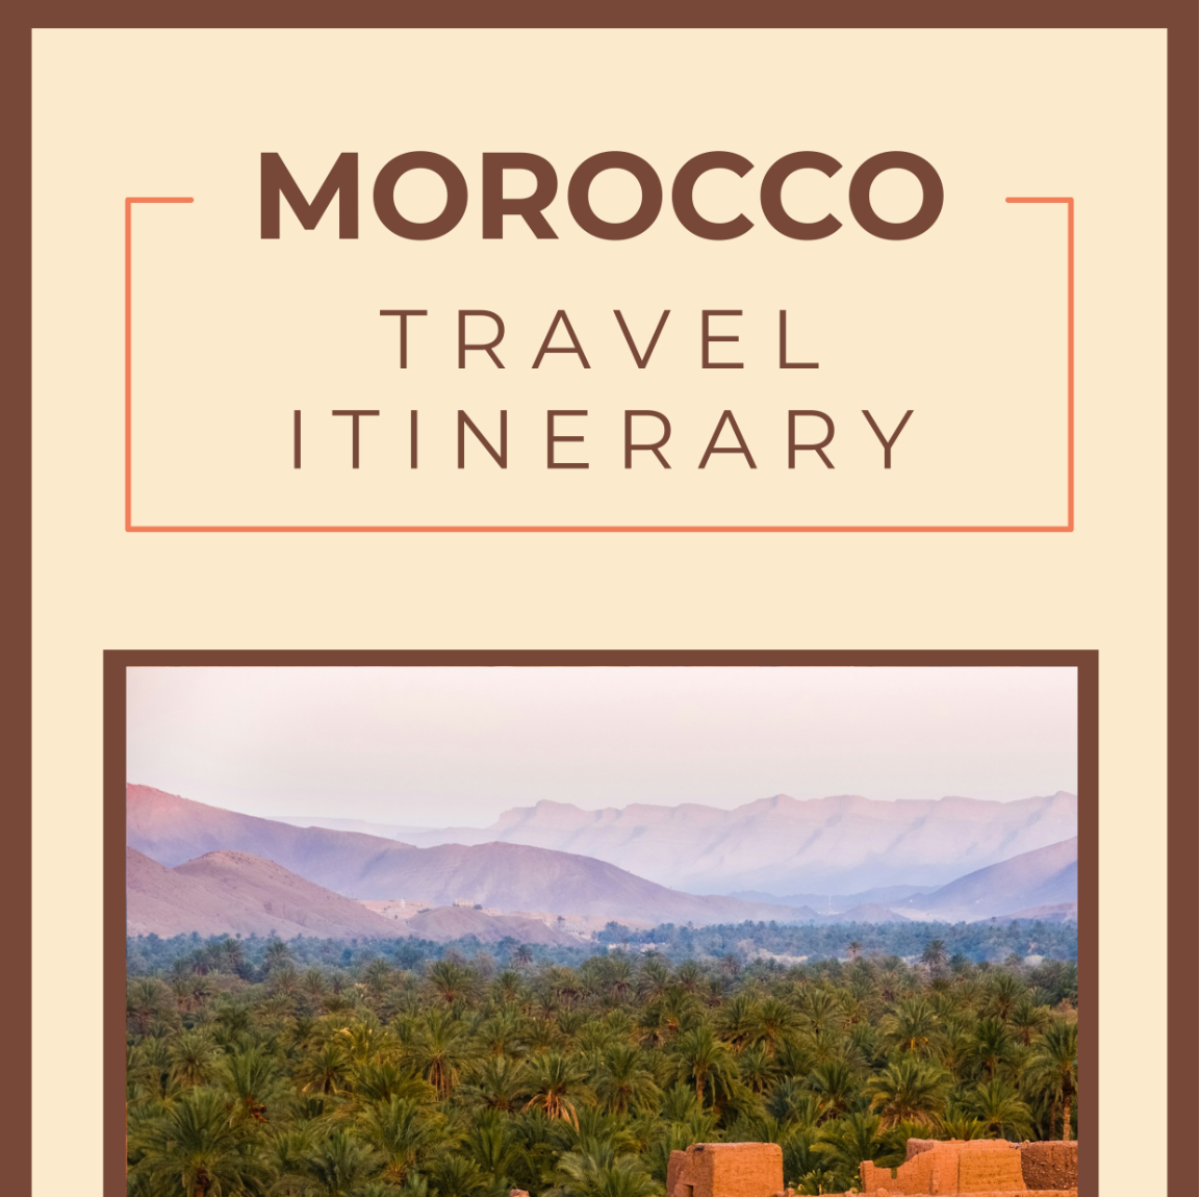 Free Morocco Travel Itinerary Template